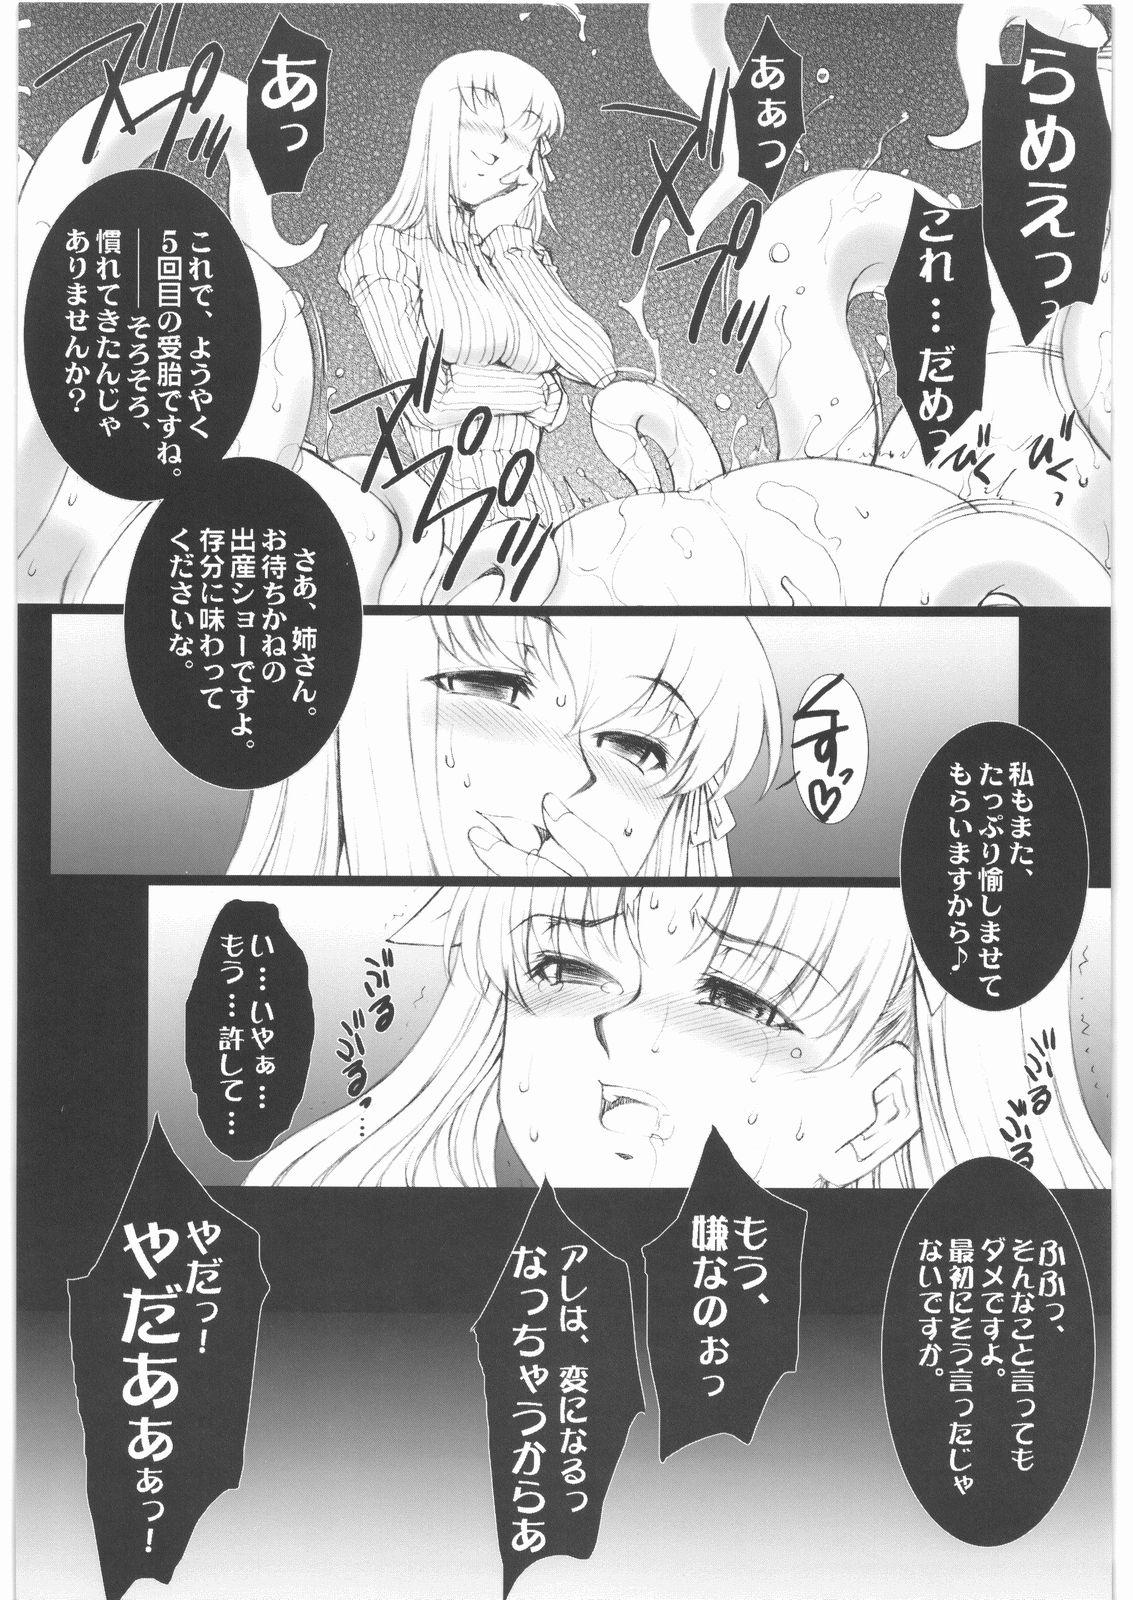 Russian Red Degeneration - Fate stay night Swingers - Page 8